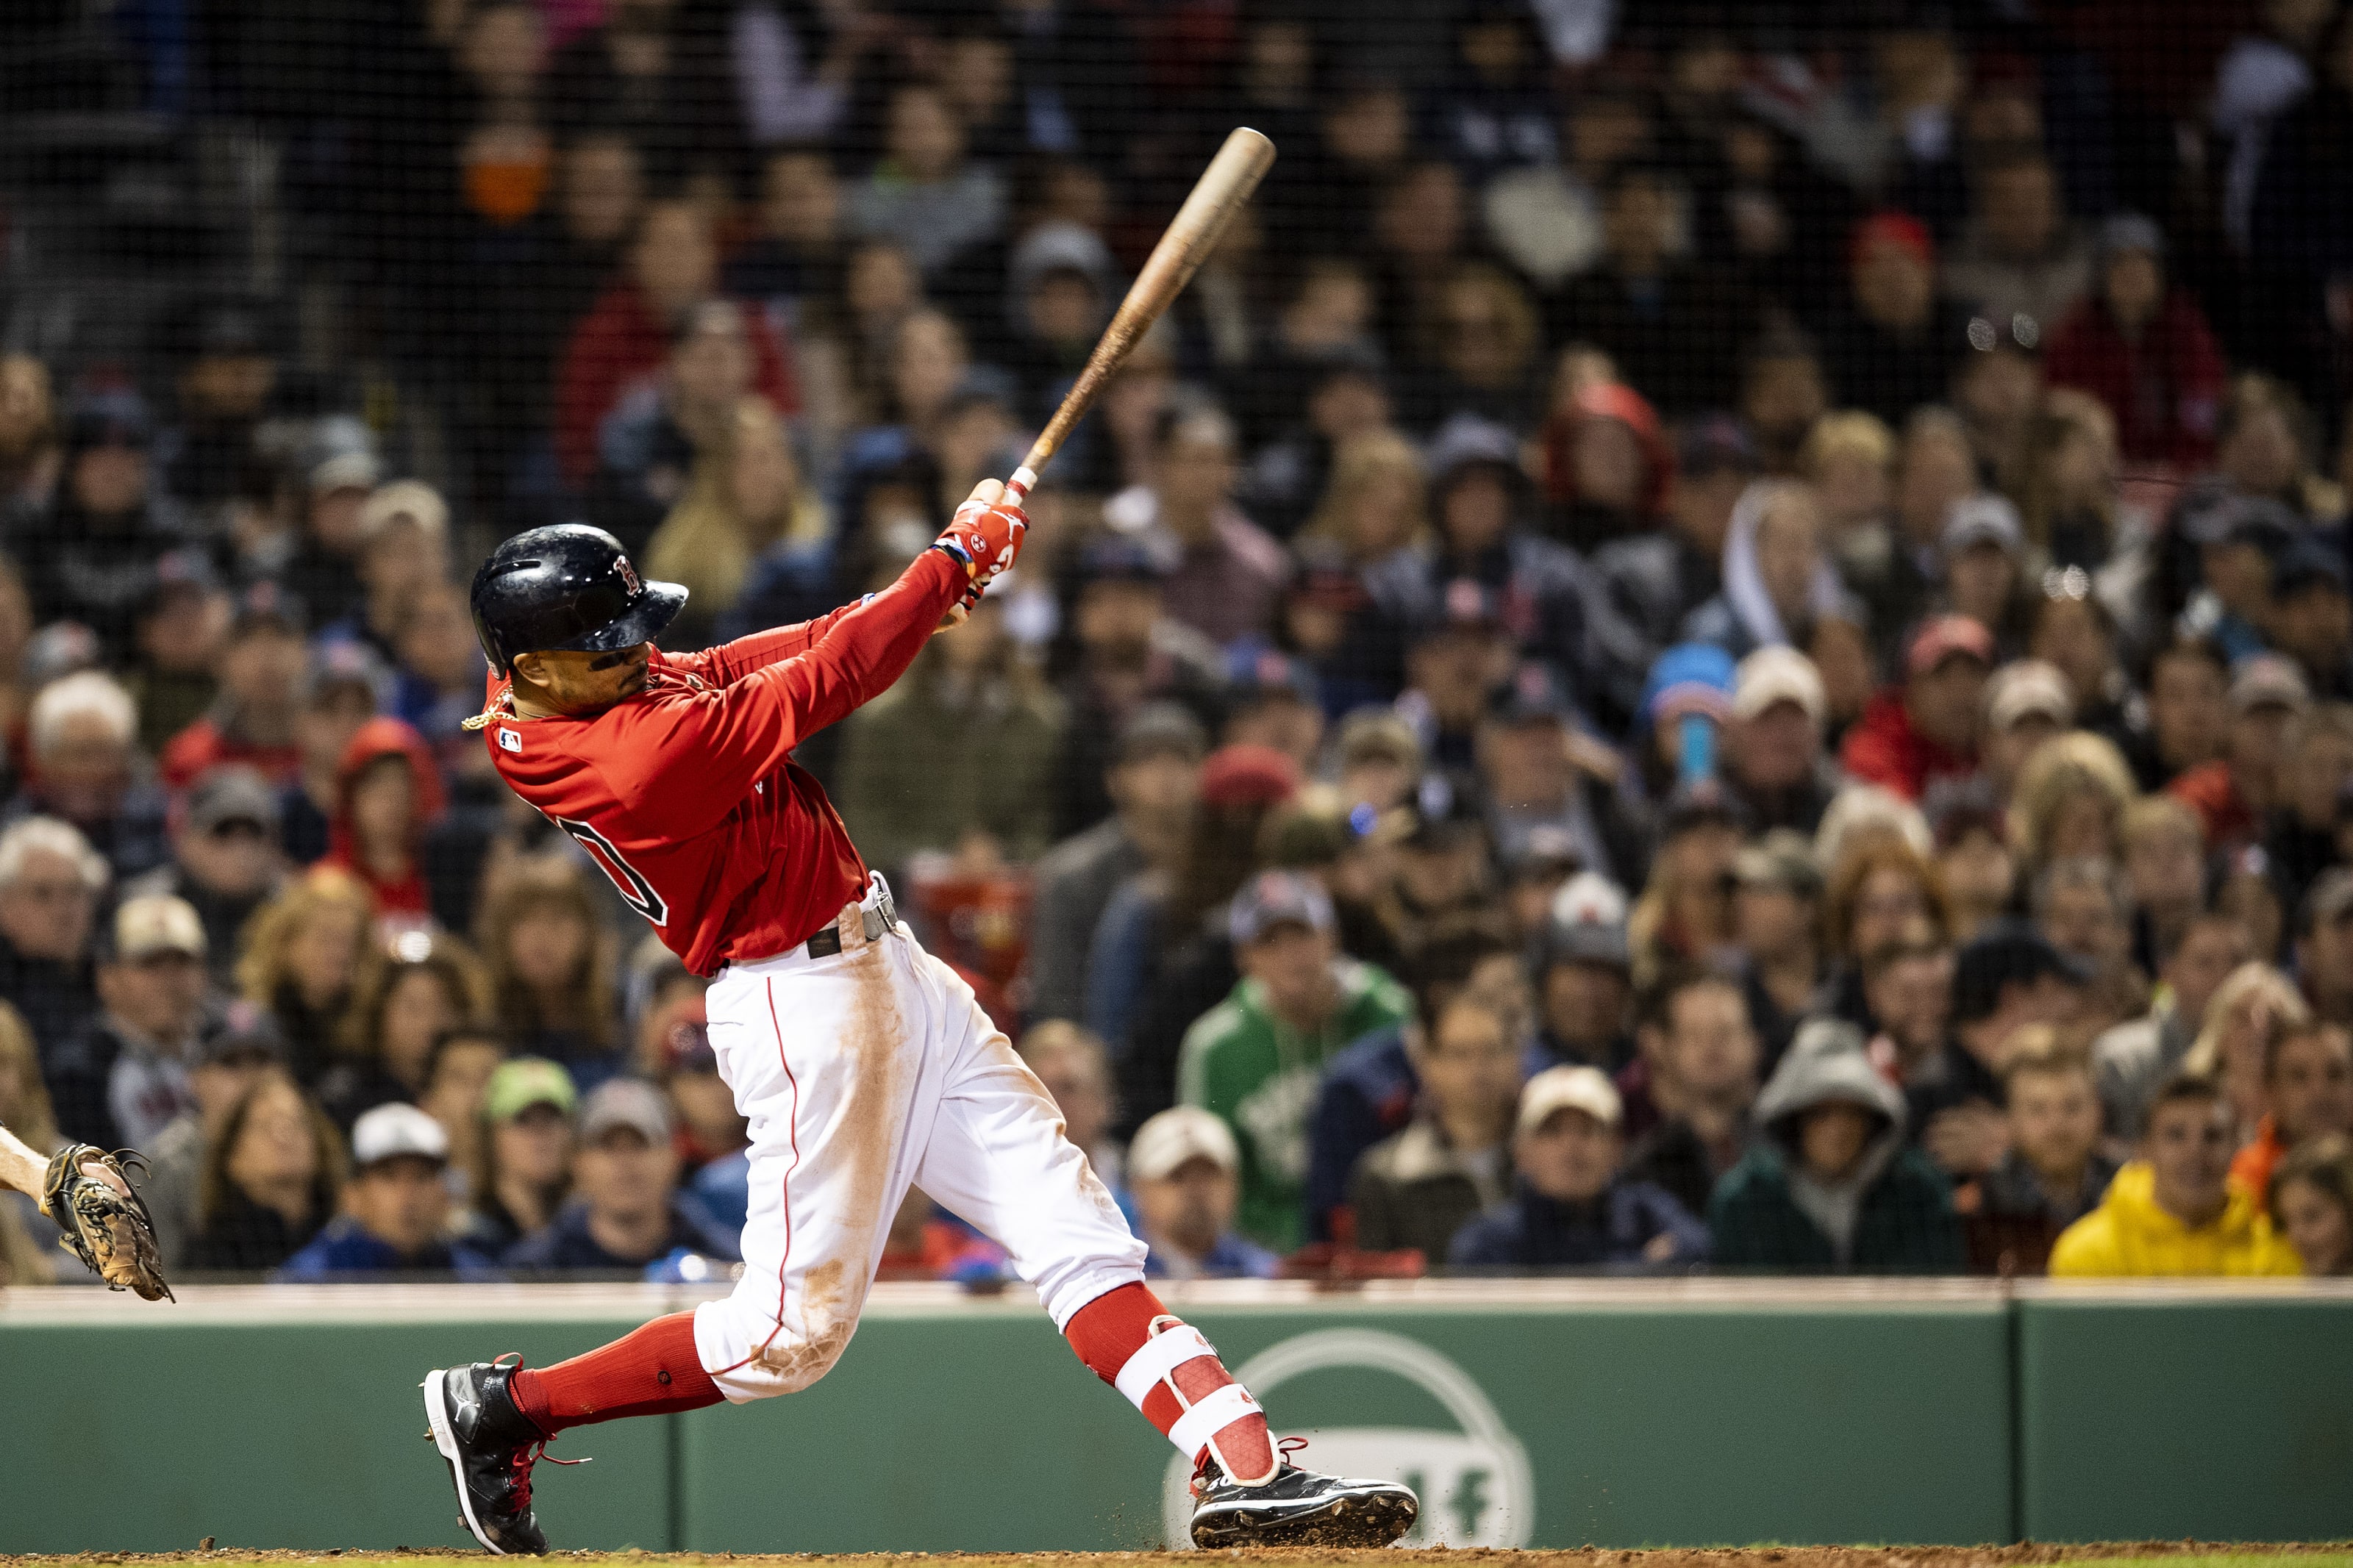 Mookie Betts, Mike Trout lead charge for on pace versus projected stats